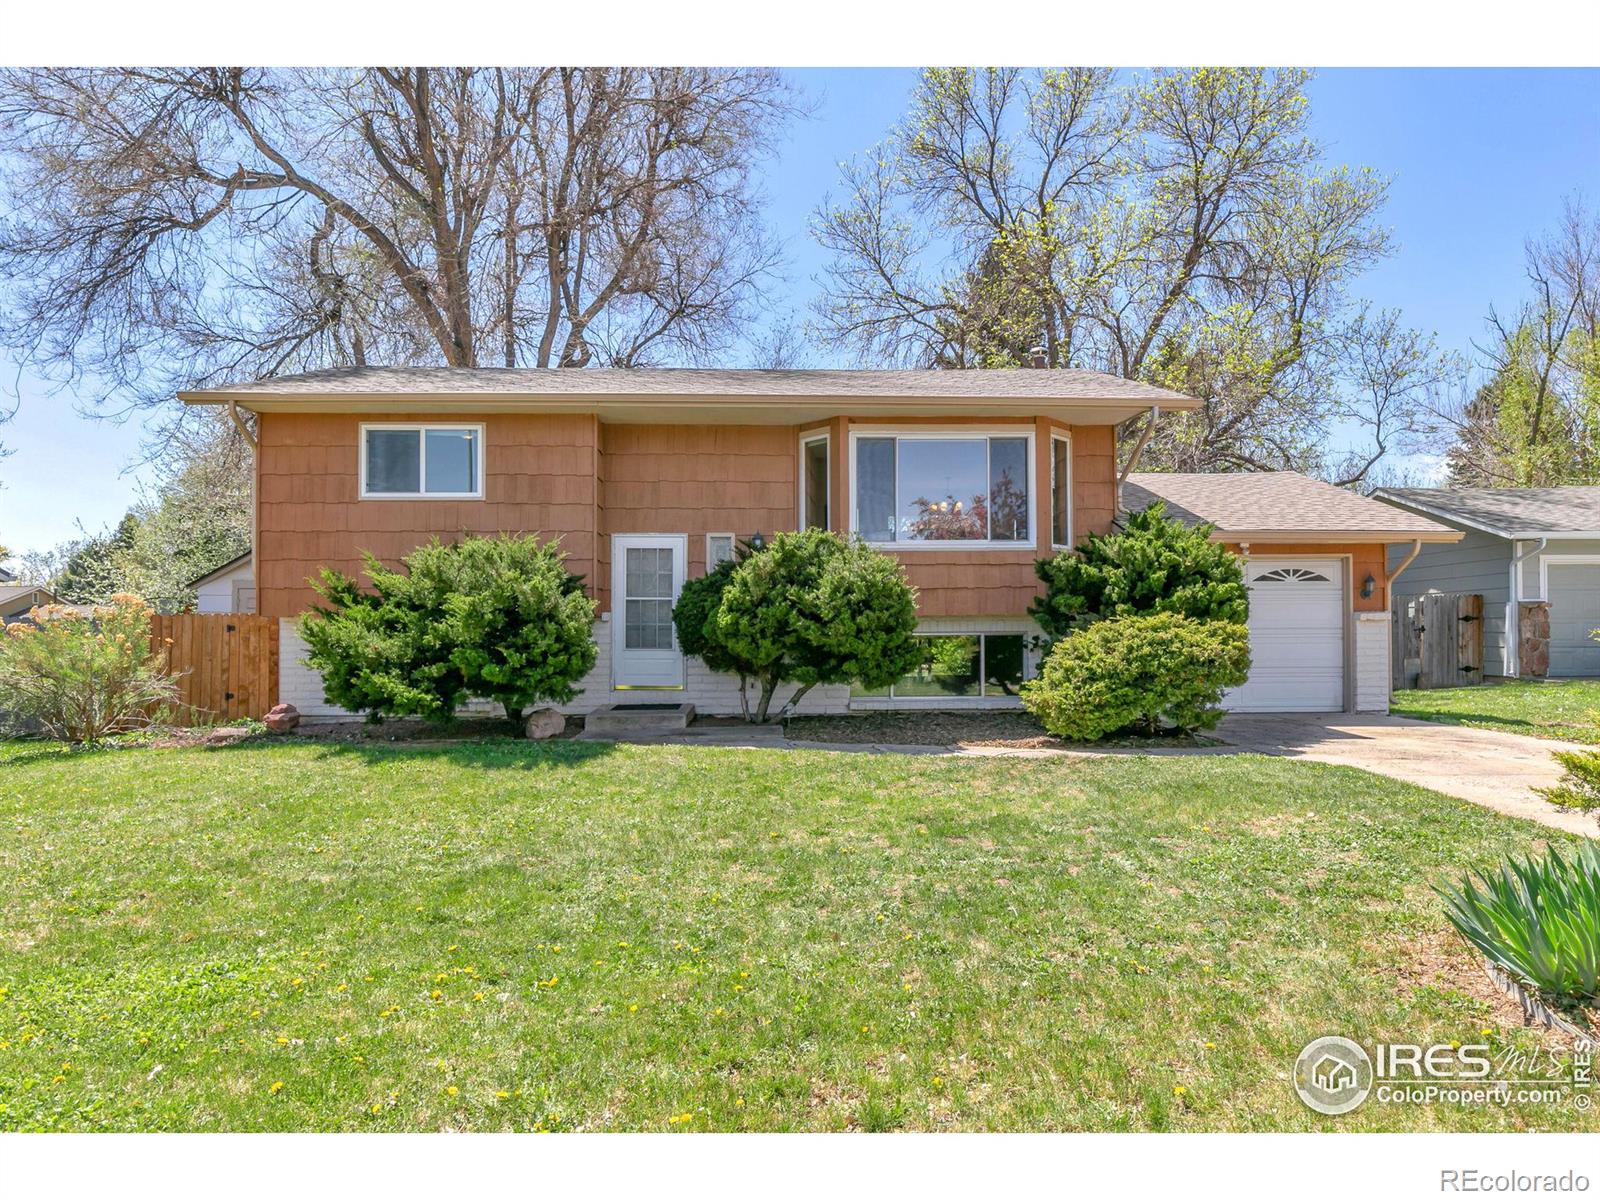 Report Image for 825  Boltz Drive,Fort Collins, Colorado